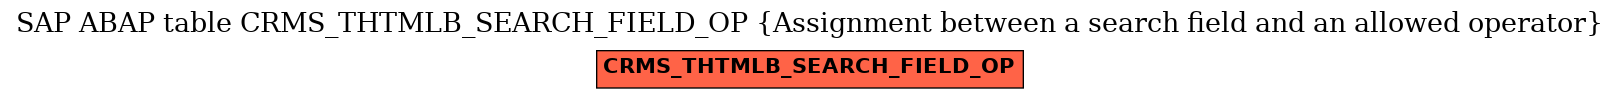 E-R Diagram for table CRMS_THTMLB_SEARCH_FIELD_OP (Assignment between a search field and an allowed operator)